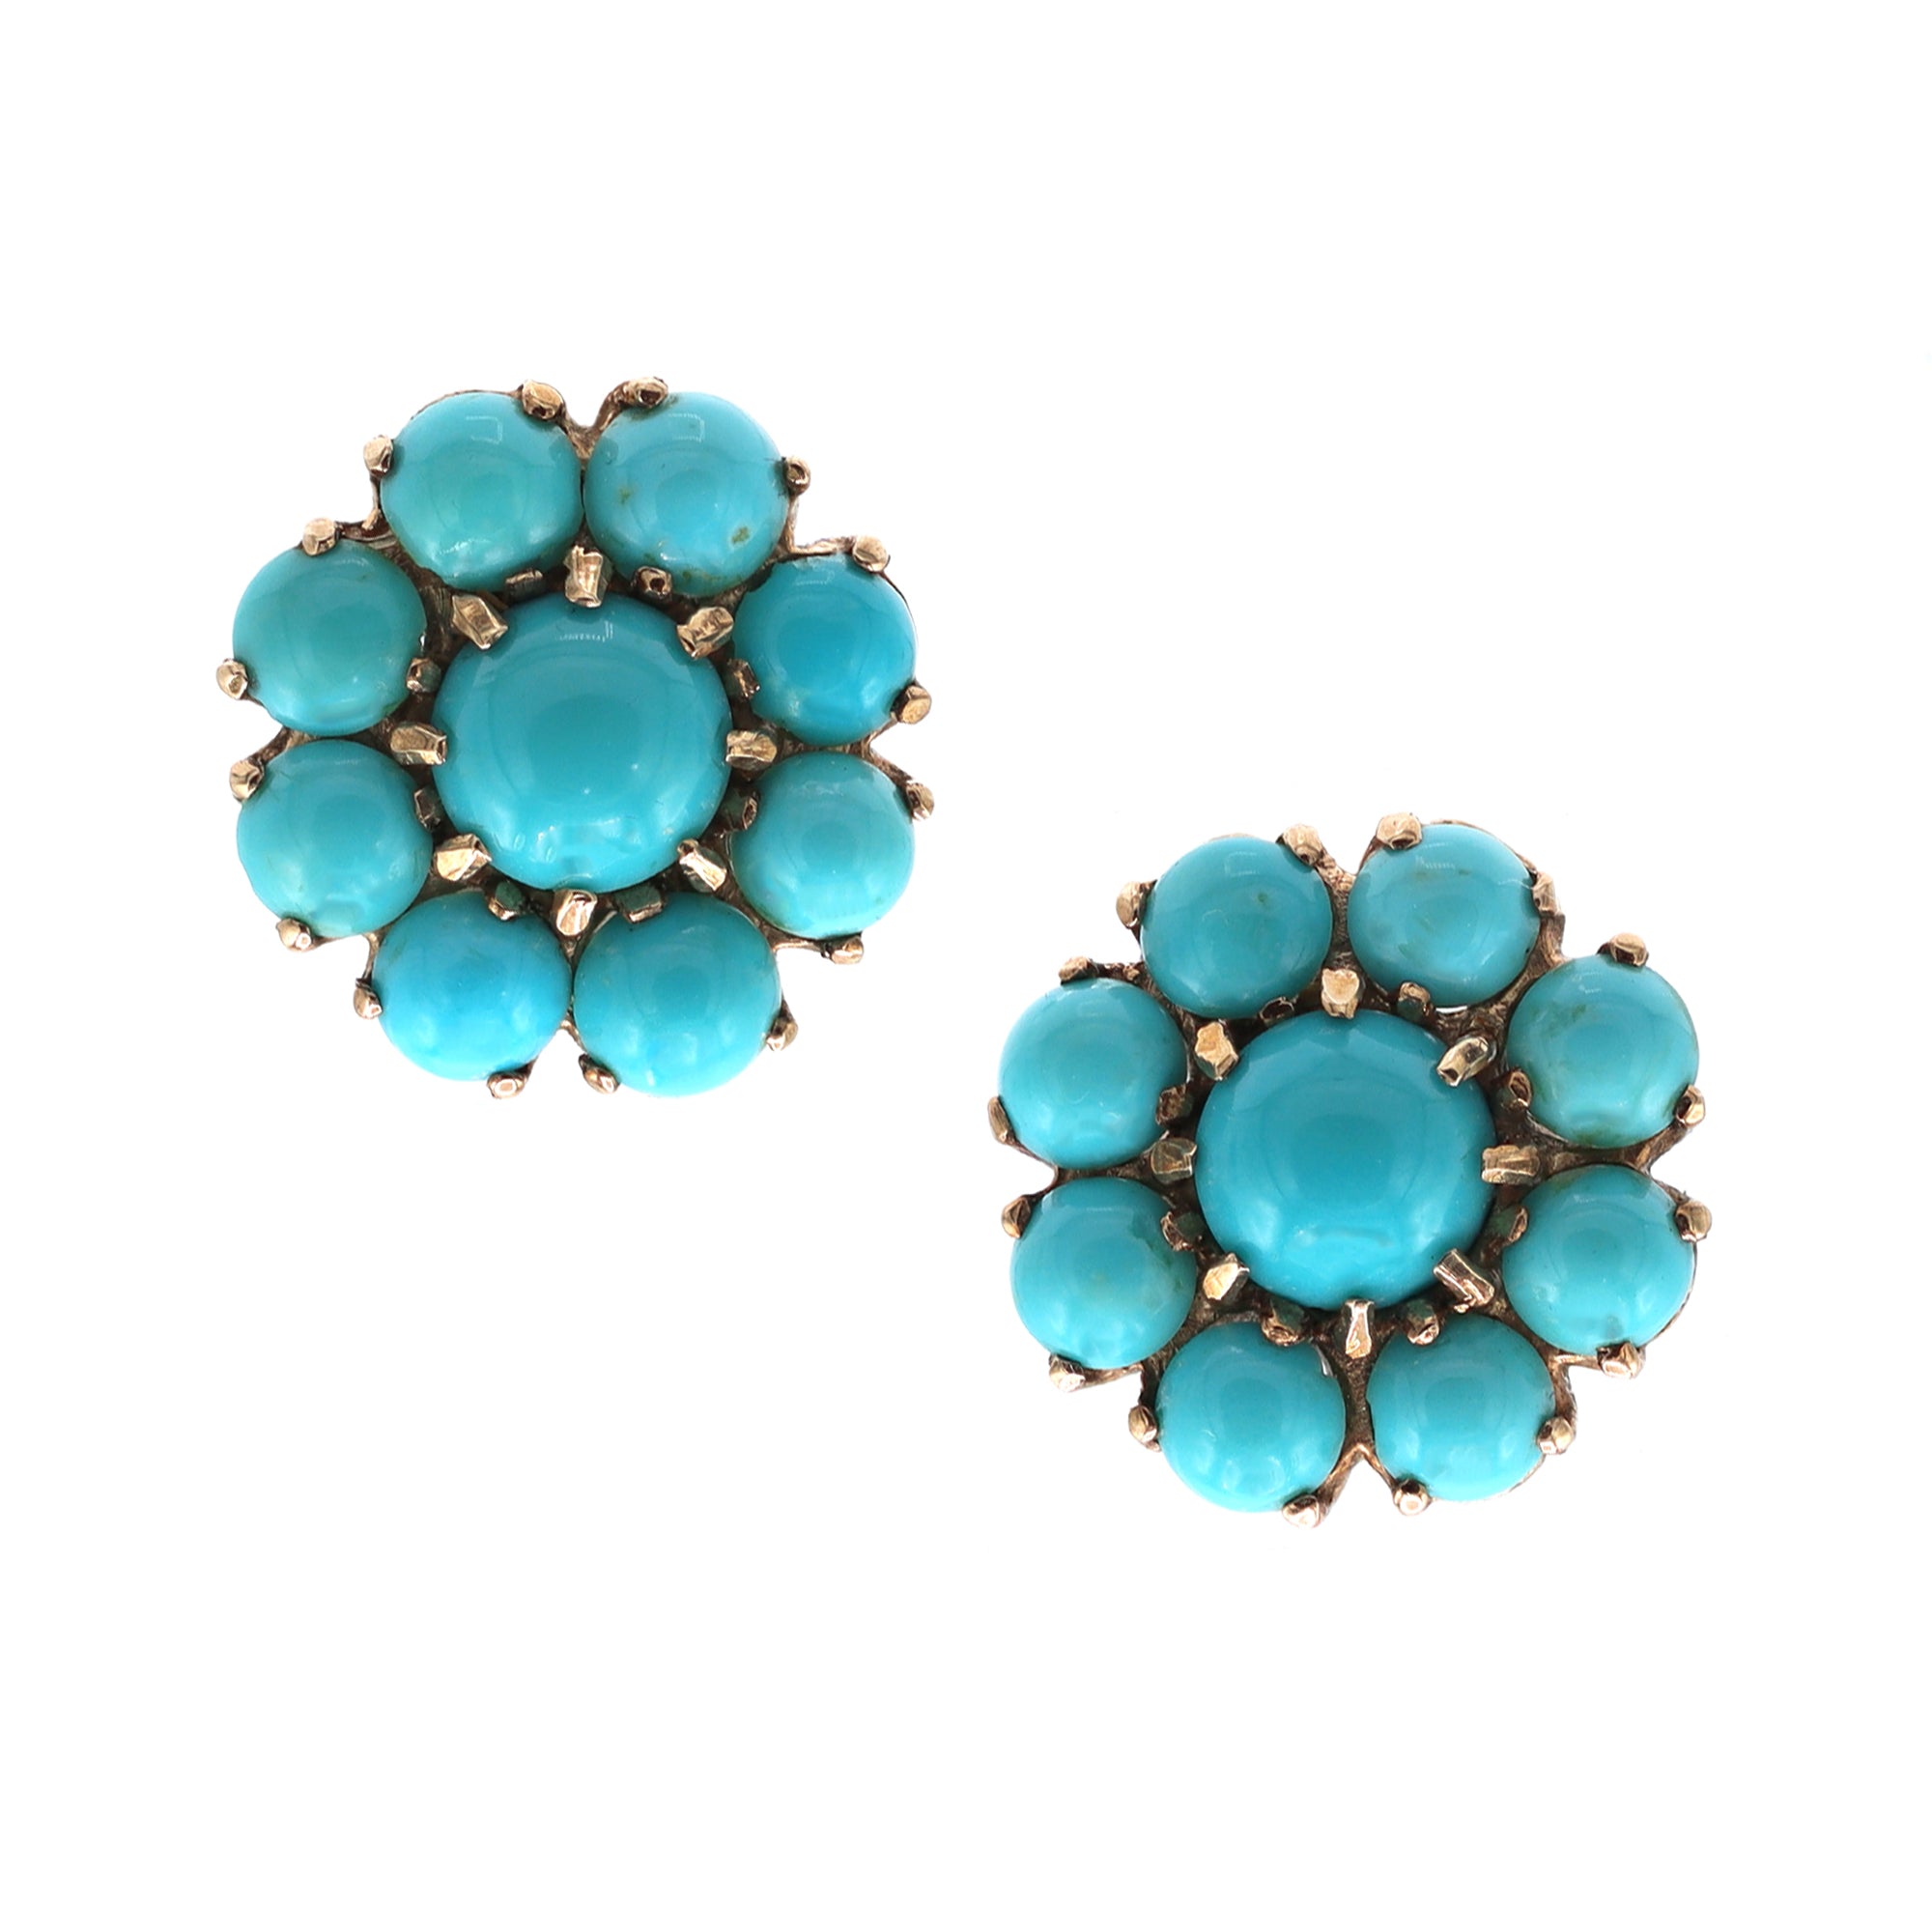 Late Victorian Natural Turquoise Florette Earrings in 10k front view